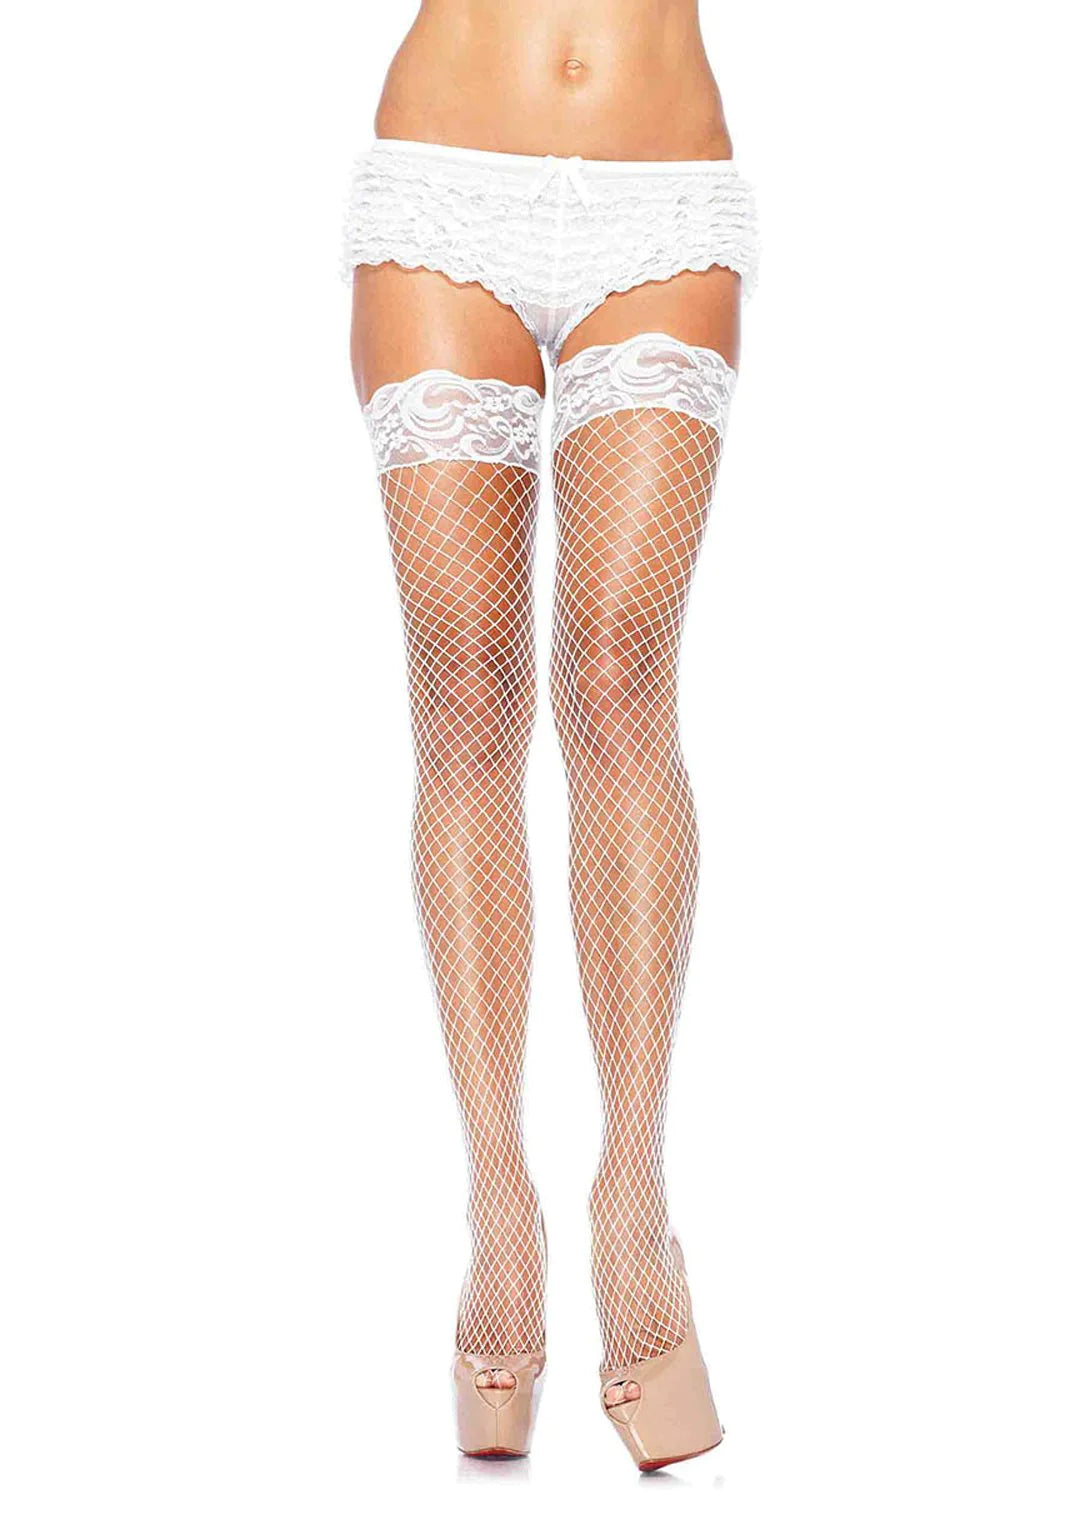 Industrial Net Silicone Stay-up Thigh Highs 9201 - White